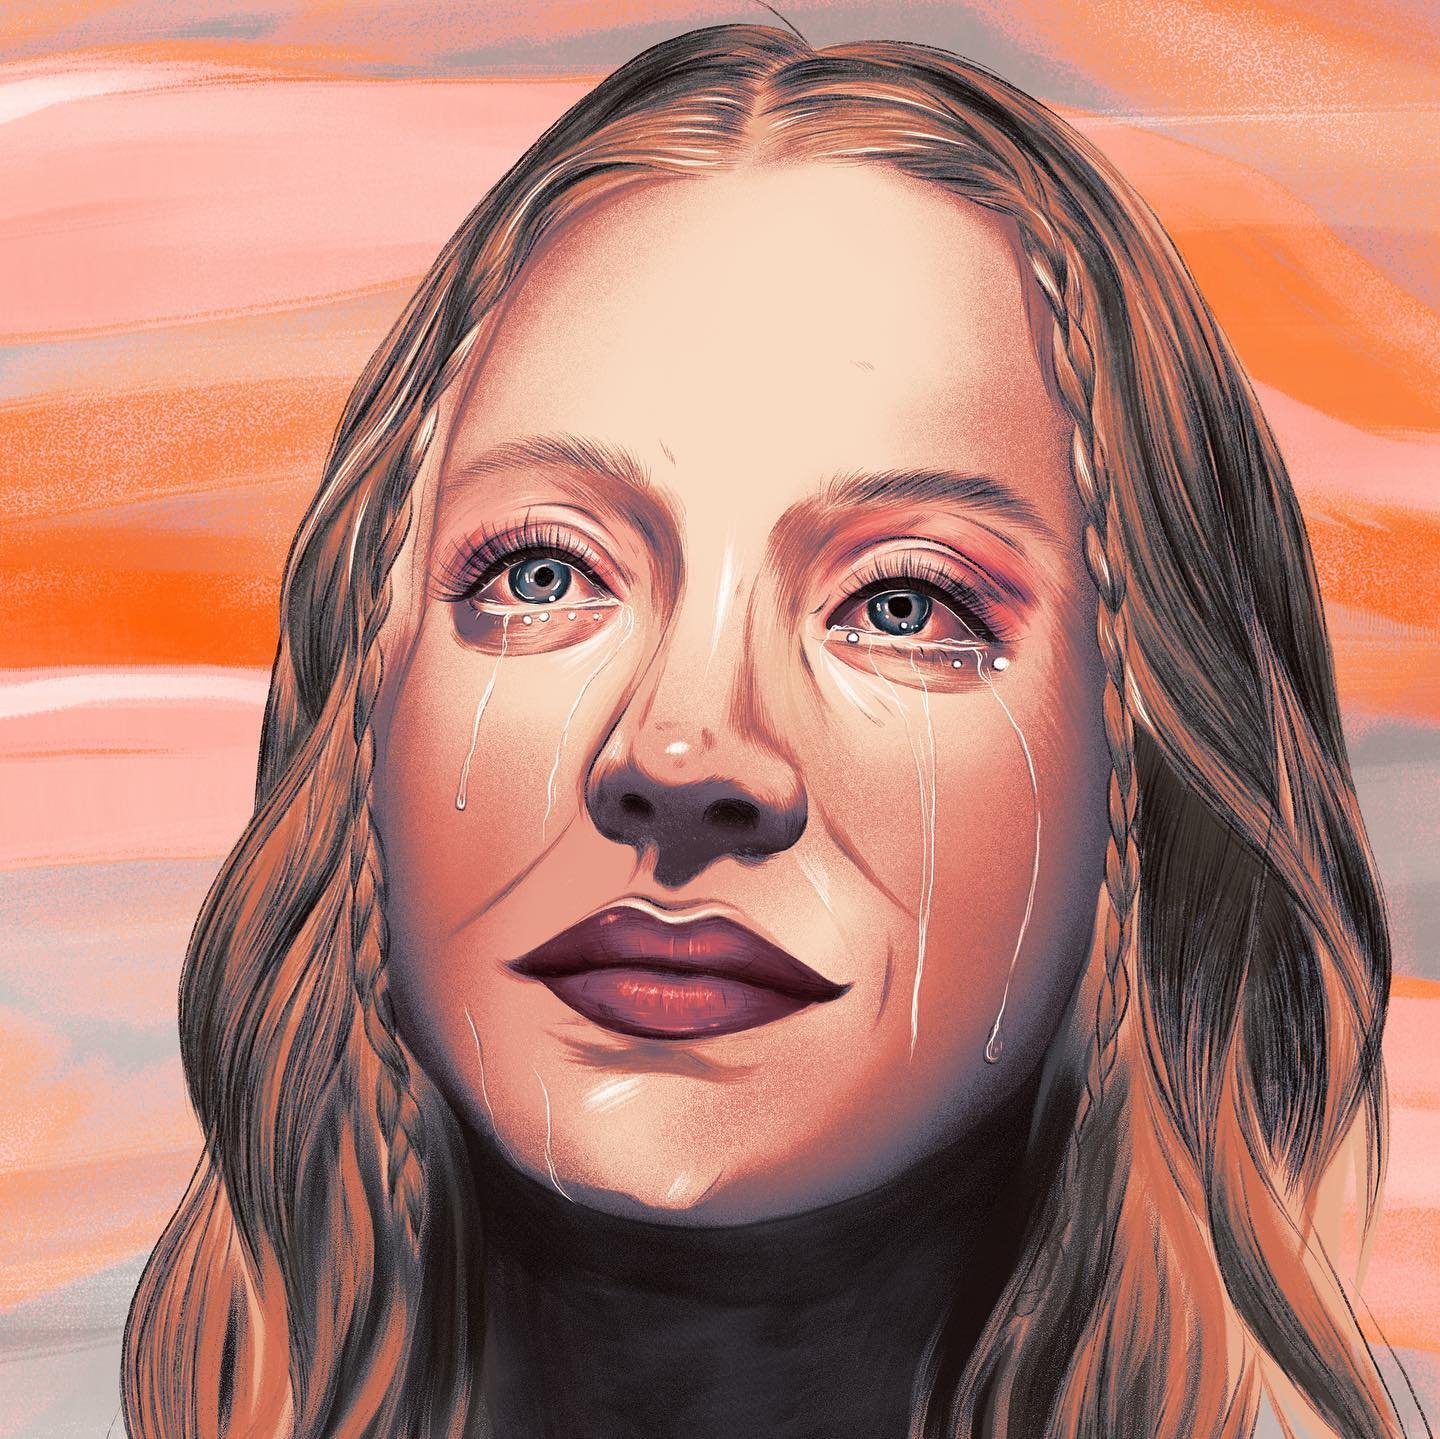 One from the #wip folder that never got finished, but seems appropriate to pull out with the release of @immaculatemovie ❤️&zwj;🔥 

This piece of @sydney_sweeney was based on that iconic scene in S2 of @euphoria ✨🧨

#euphoria #donnidavy #sydneyswee